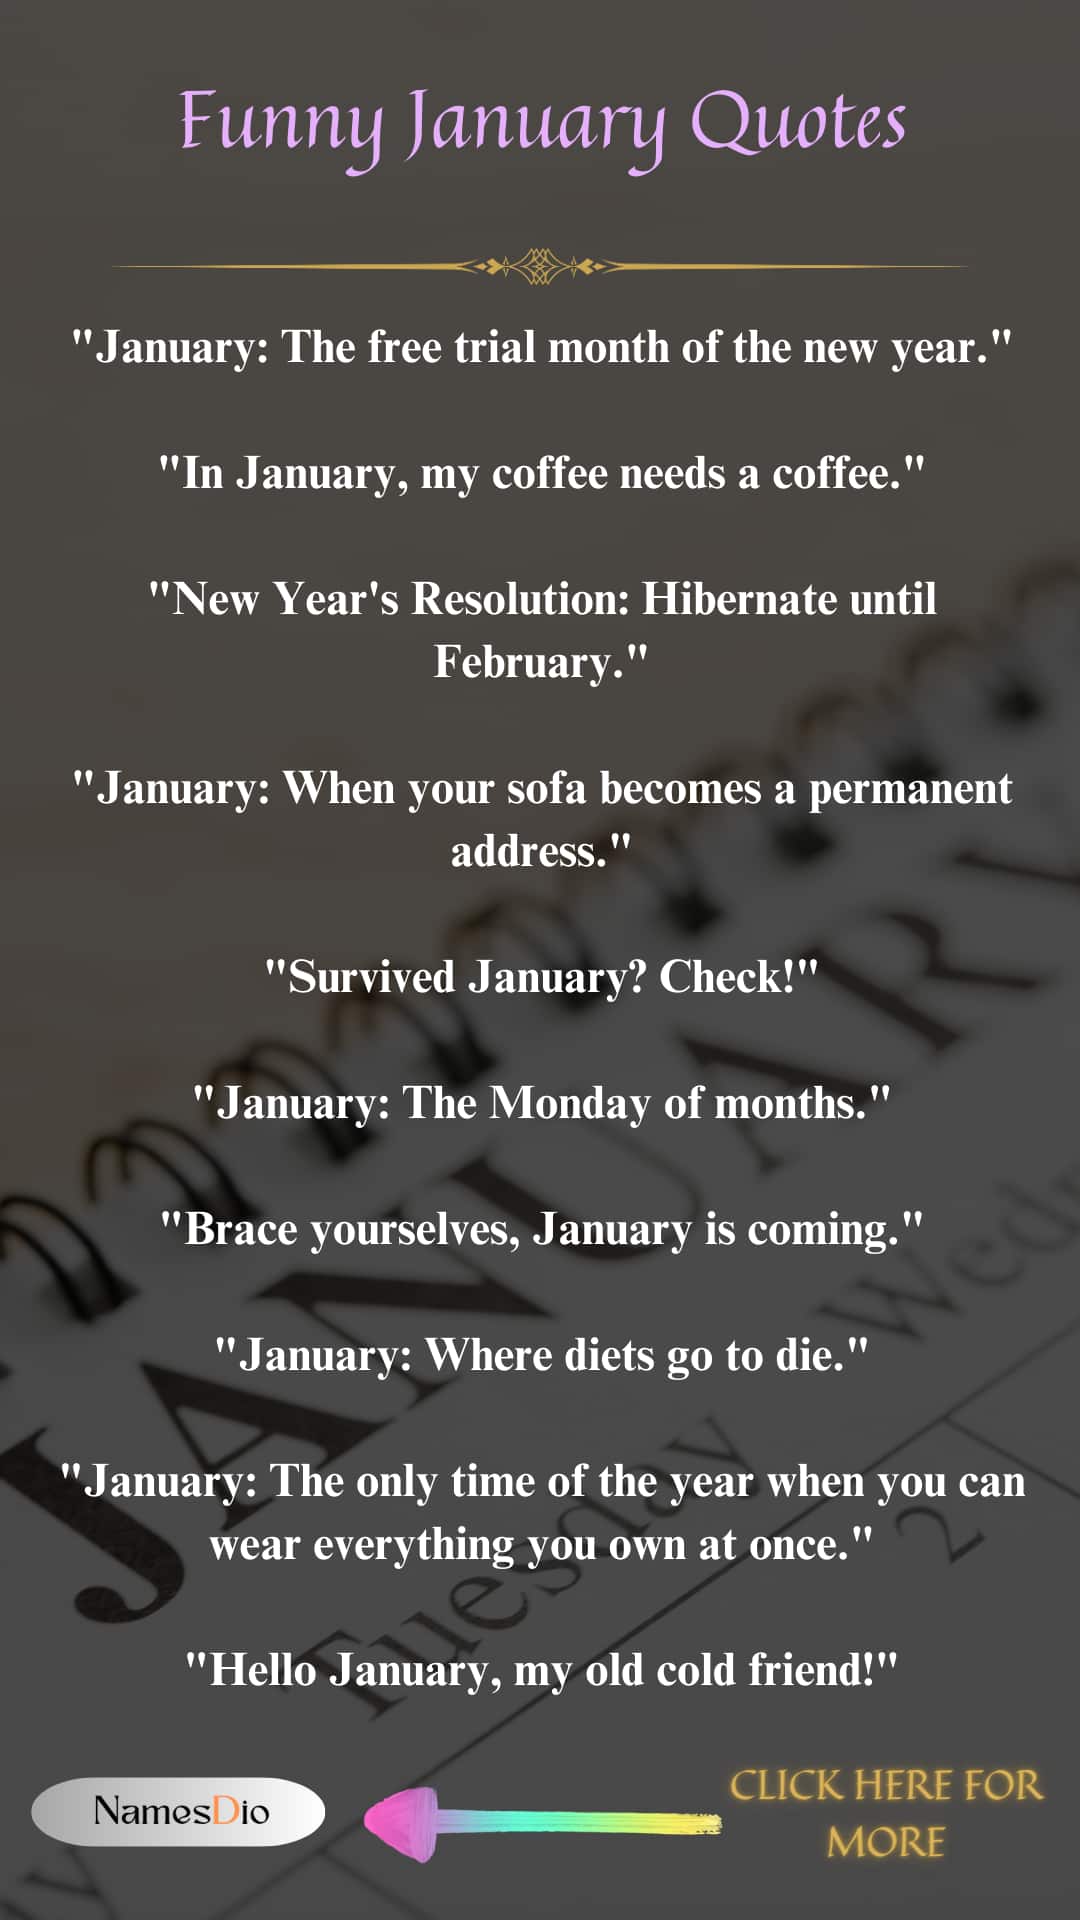 Funny-January-Quotes